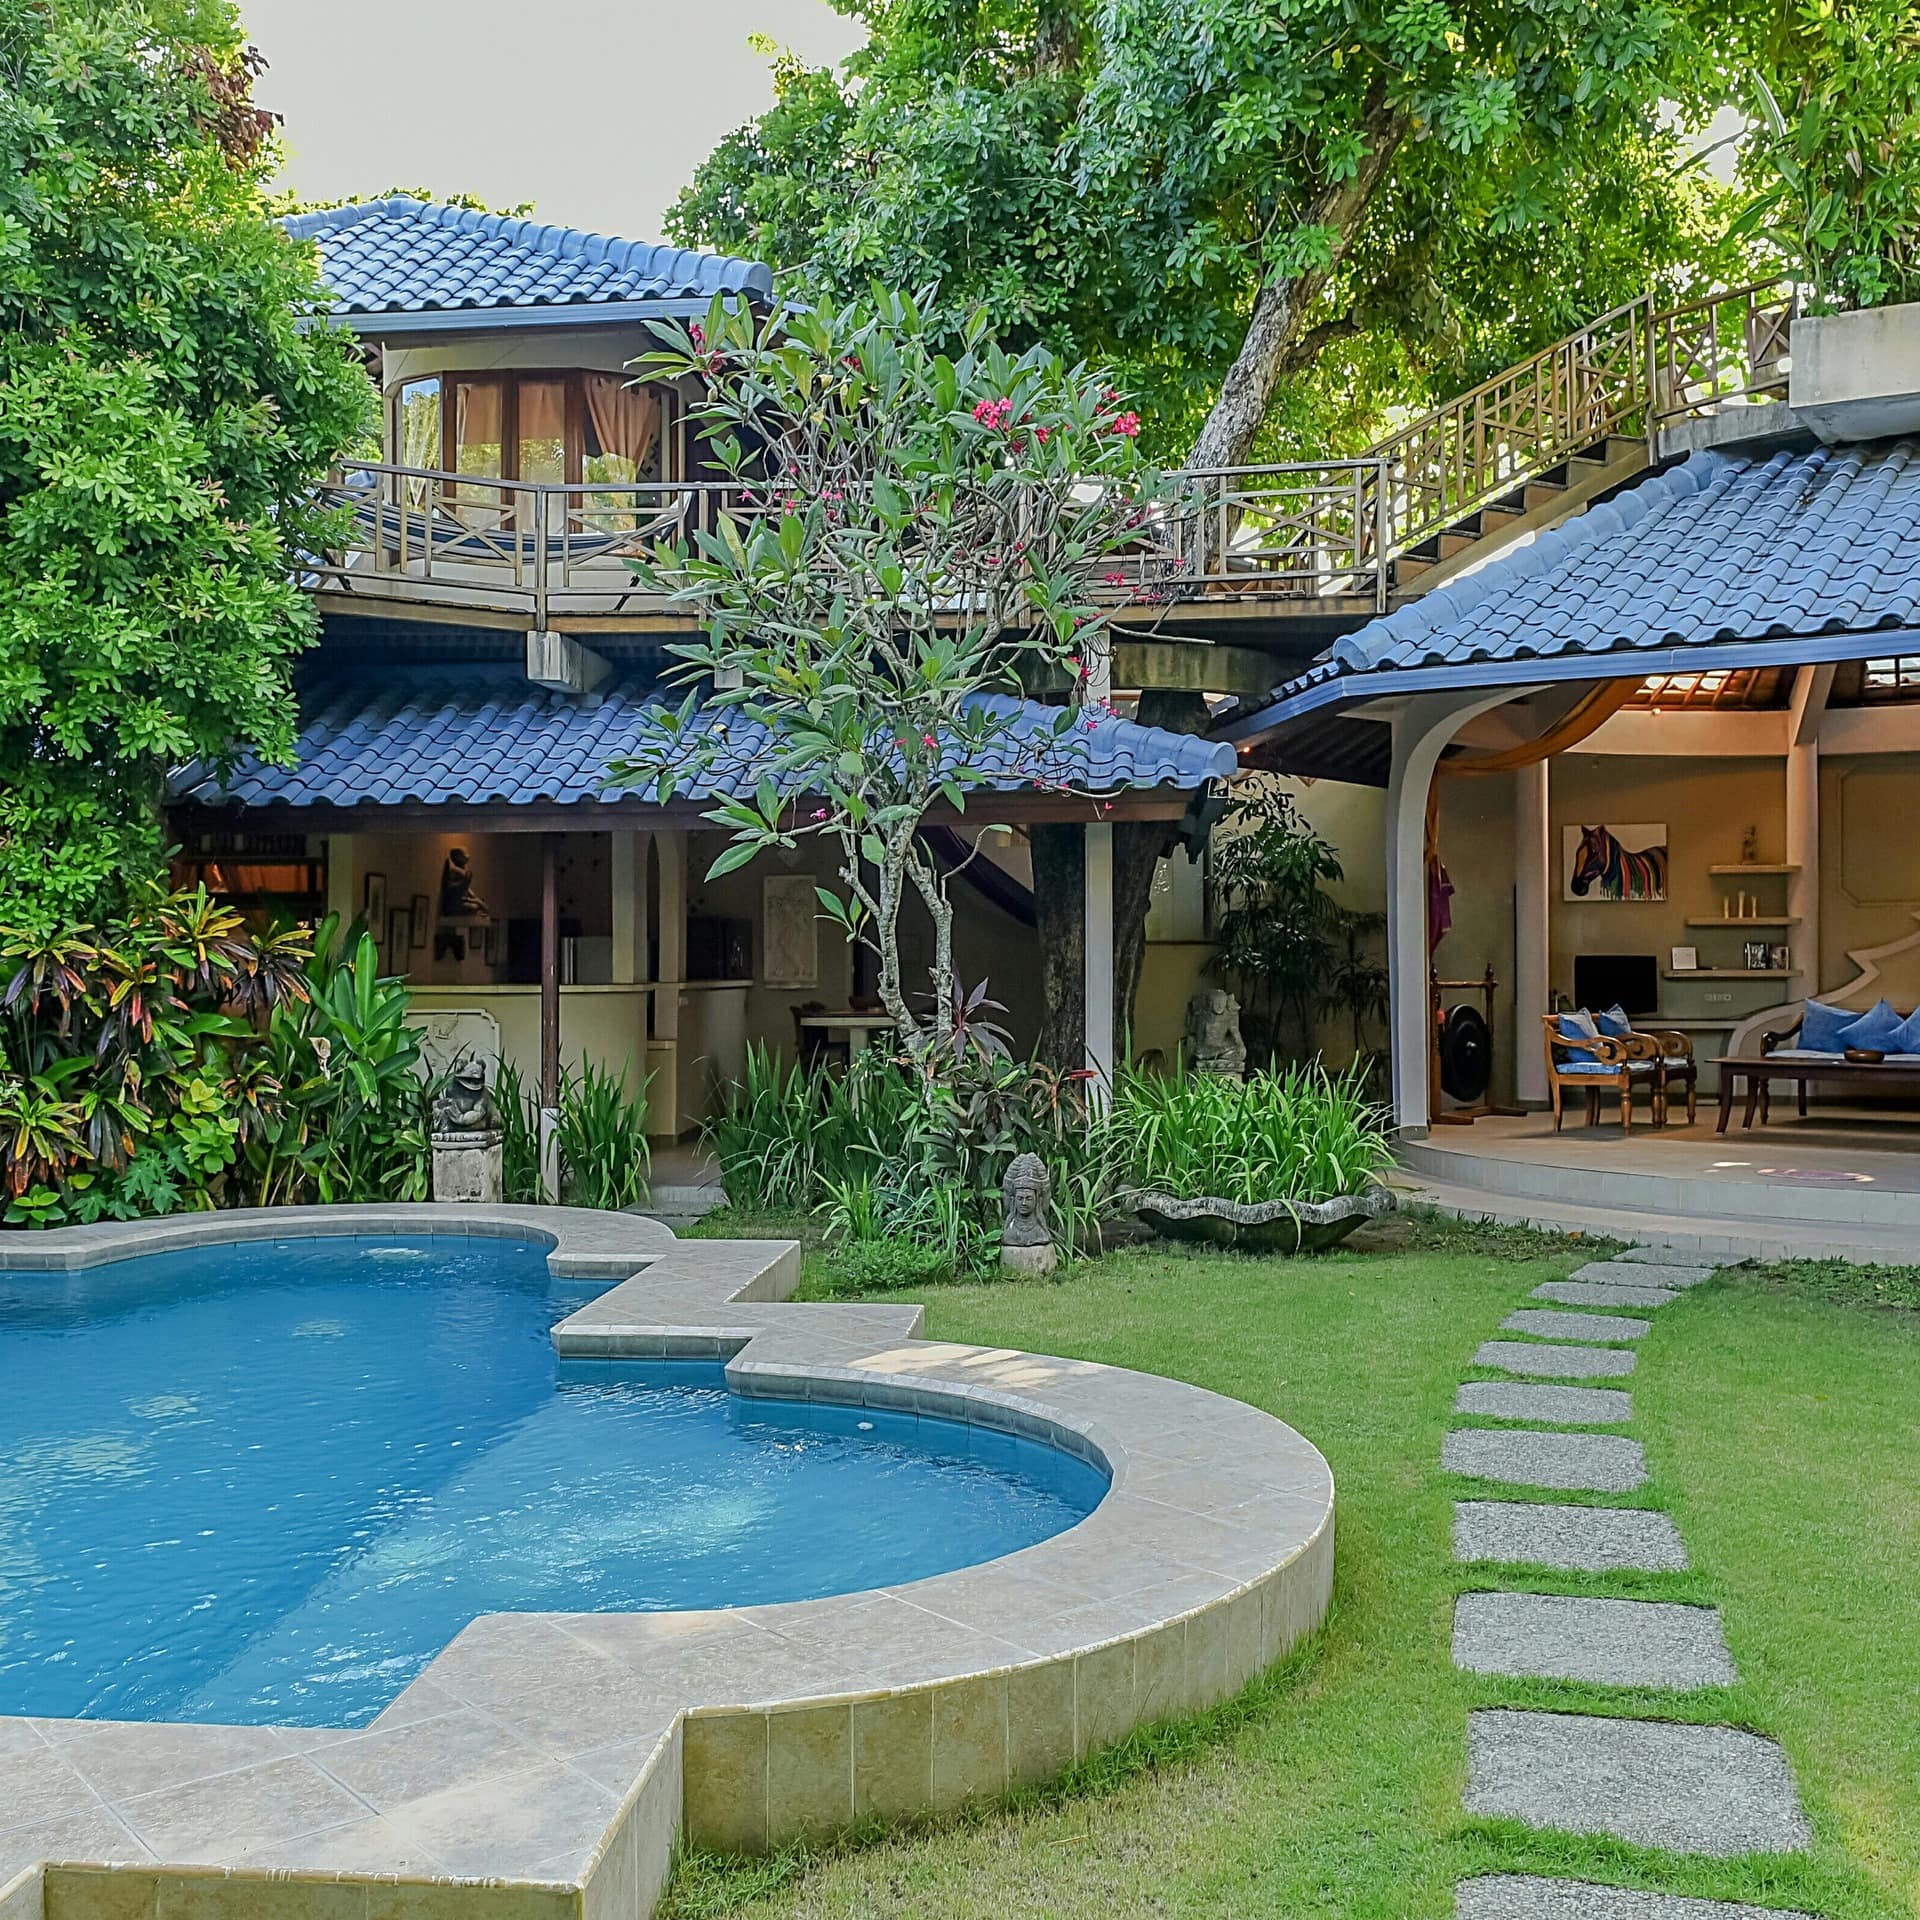 A luxury Bali villa with a seating area and pool in the garden